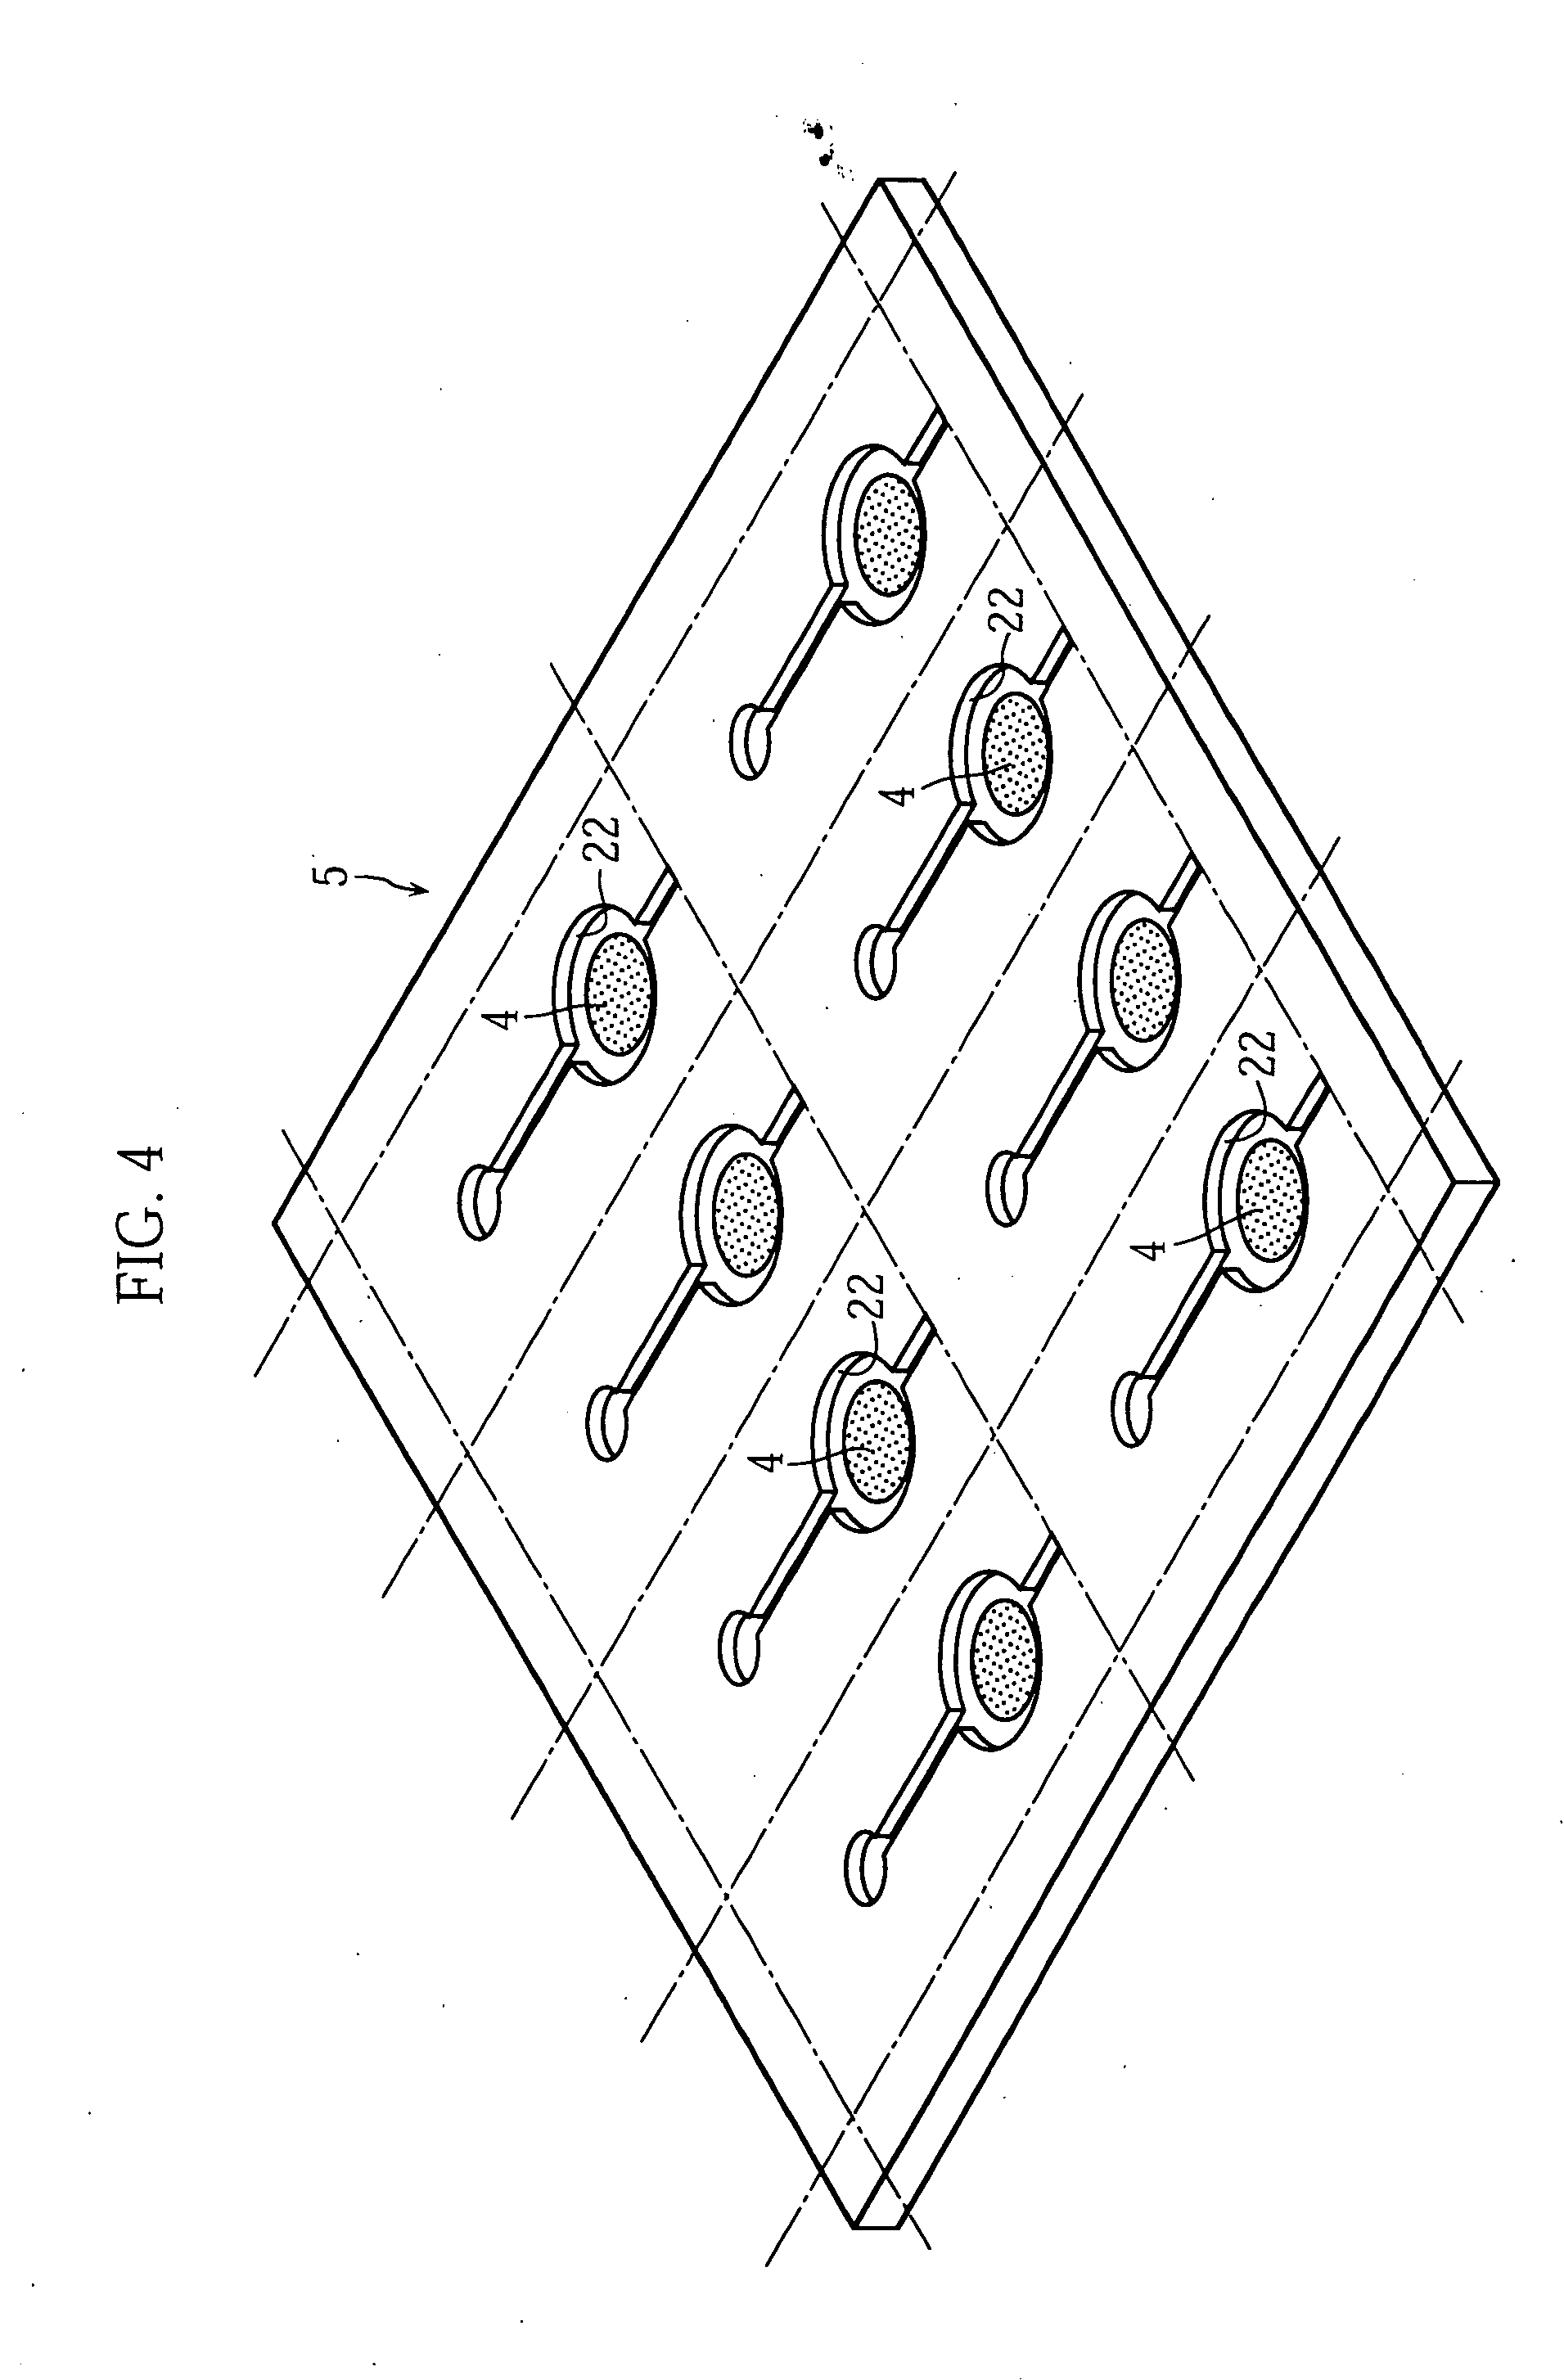 Method for manufacturing tool for analysis